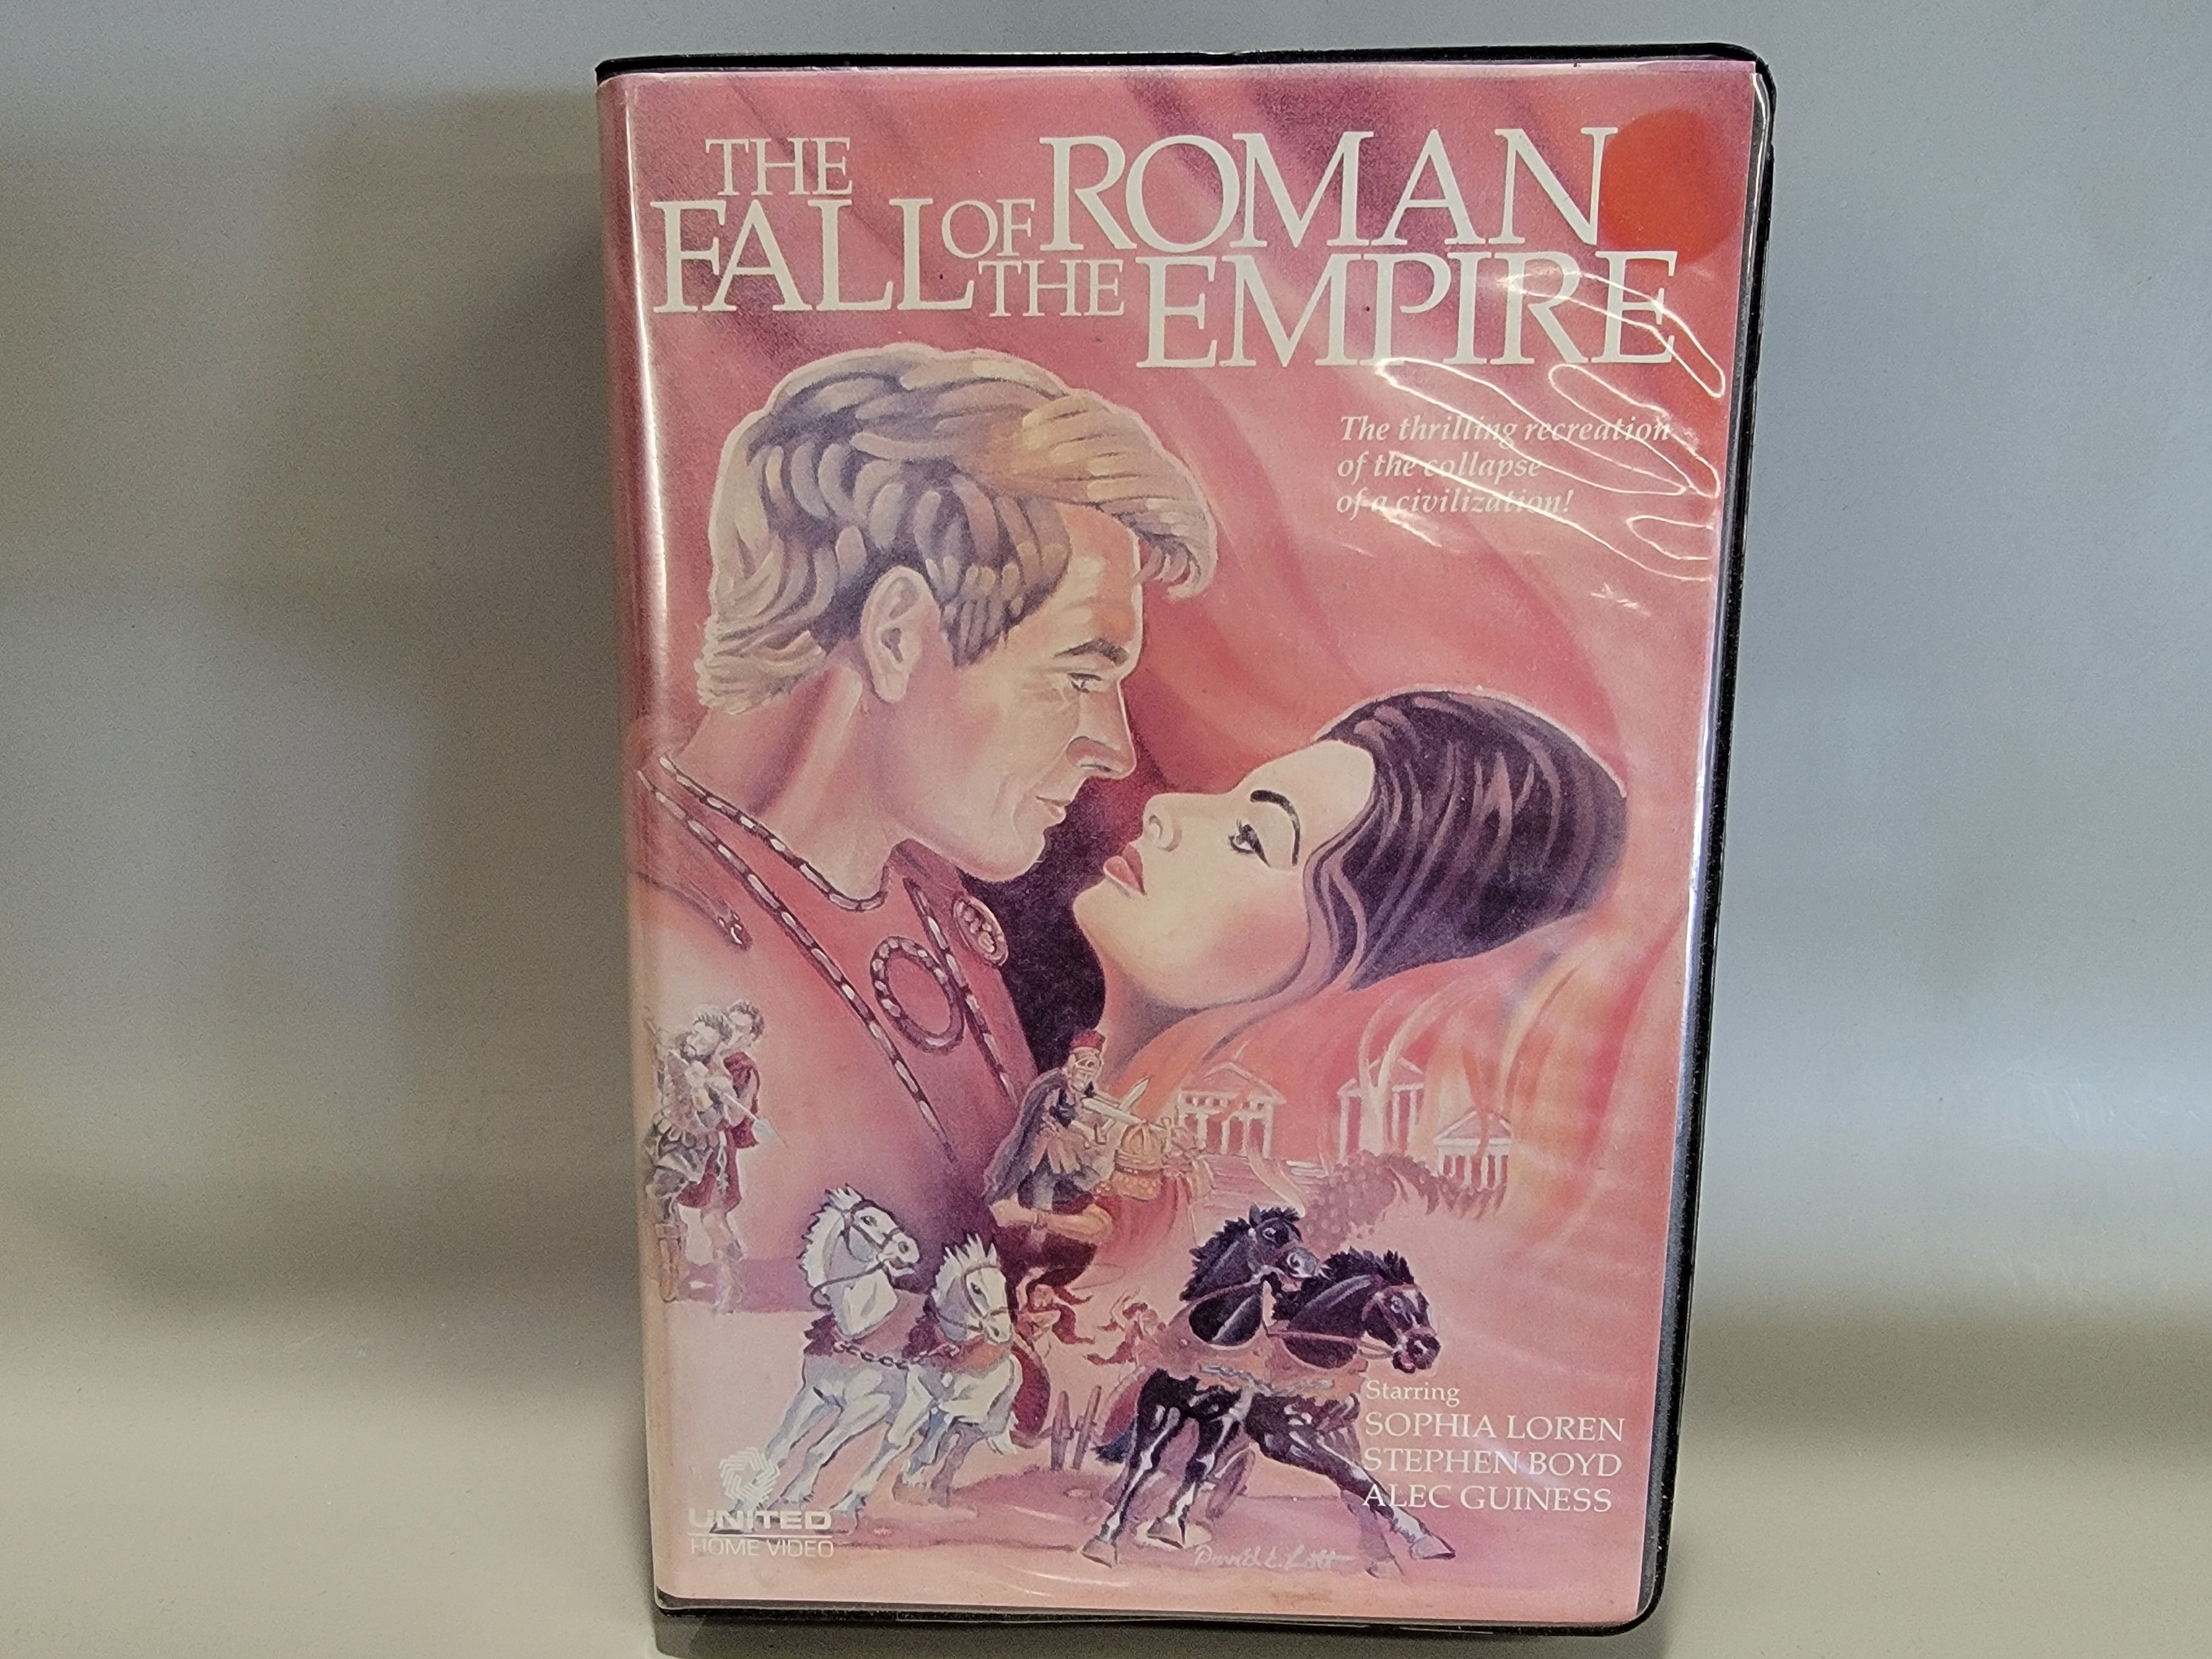 THE FALL OF THE ROMAN EMPIRE VHS [USED]